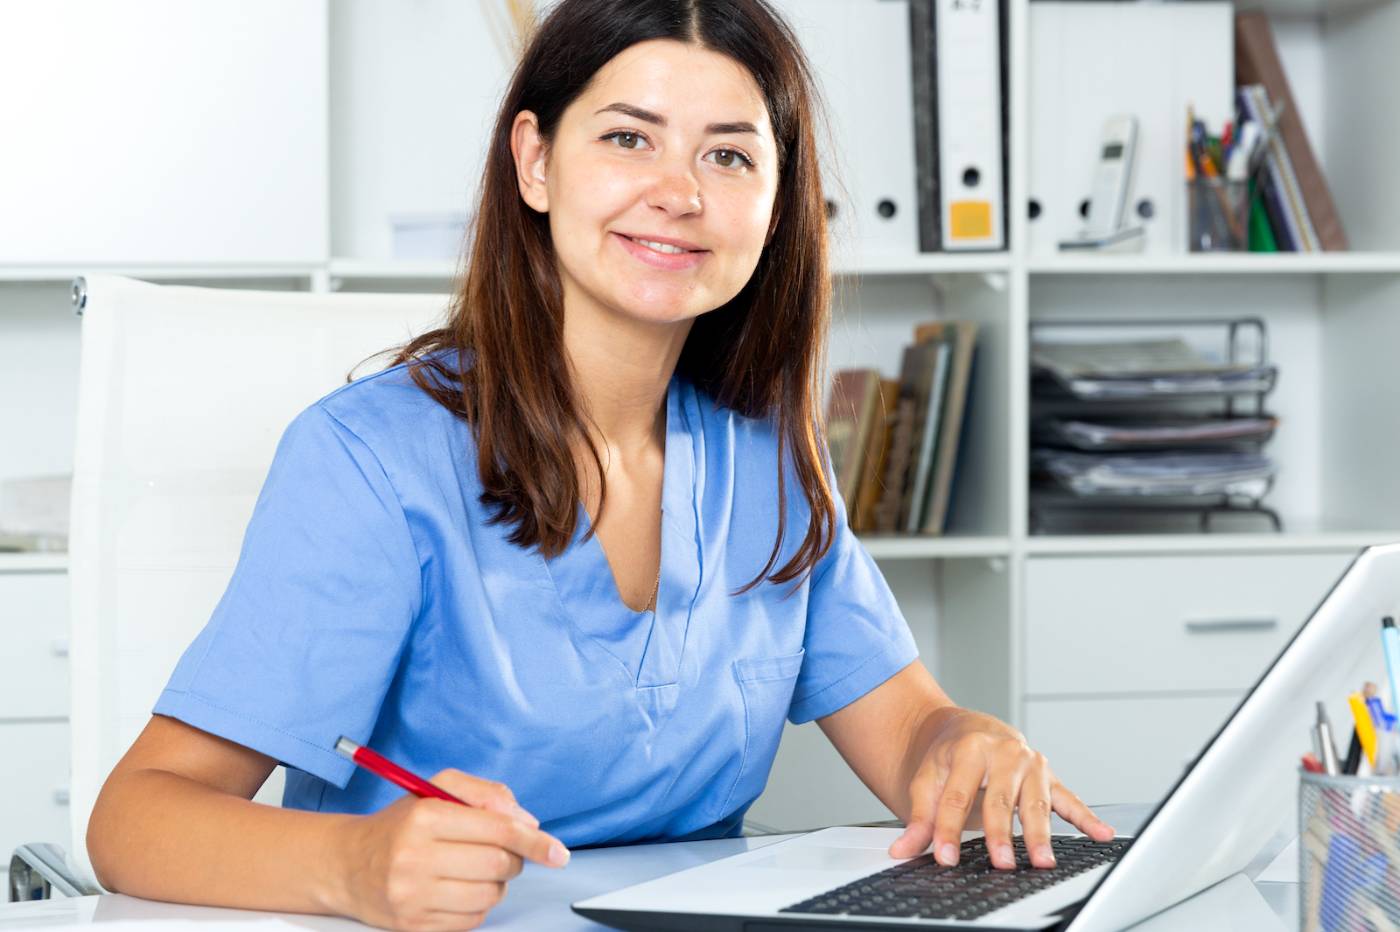 Female healthcare manager working on laptop at desk